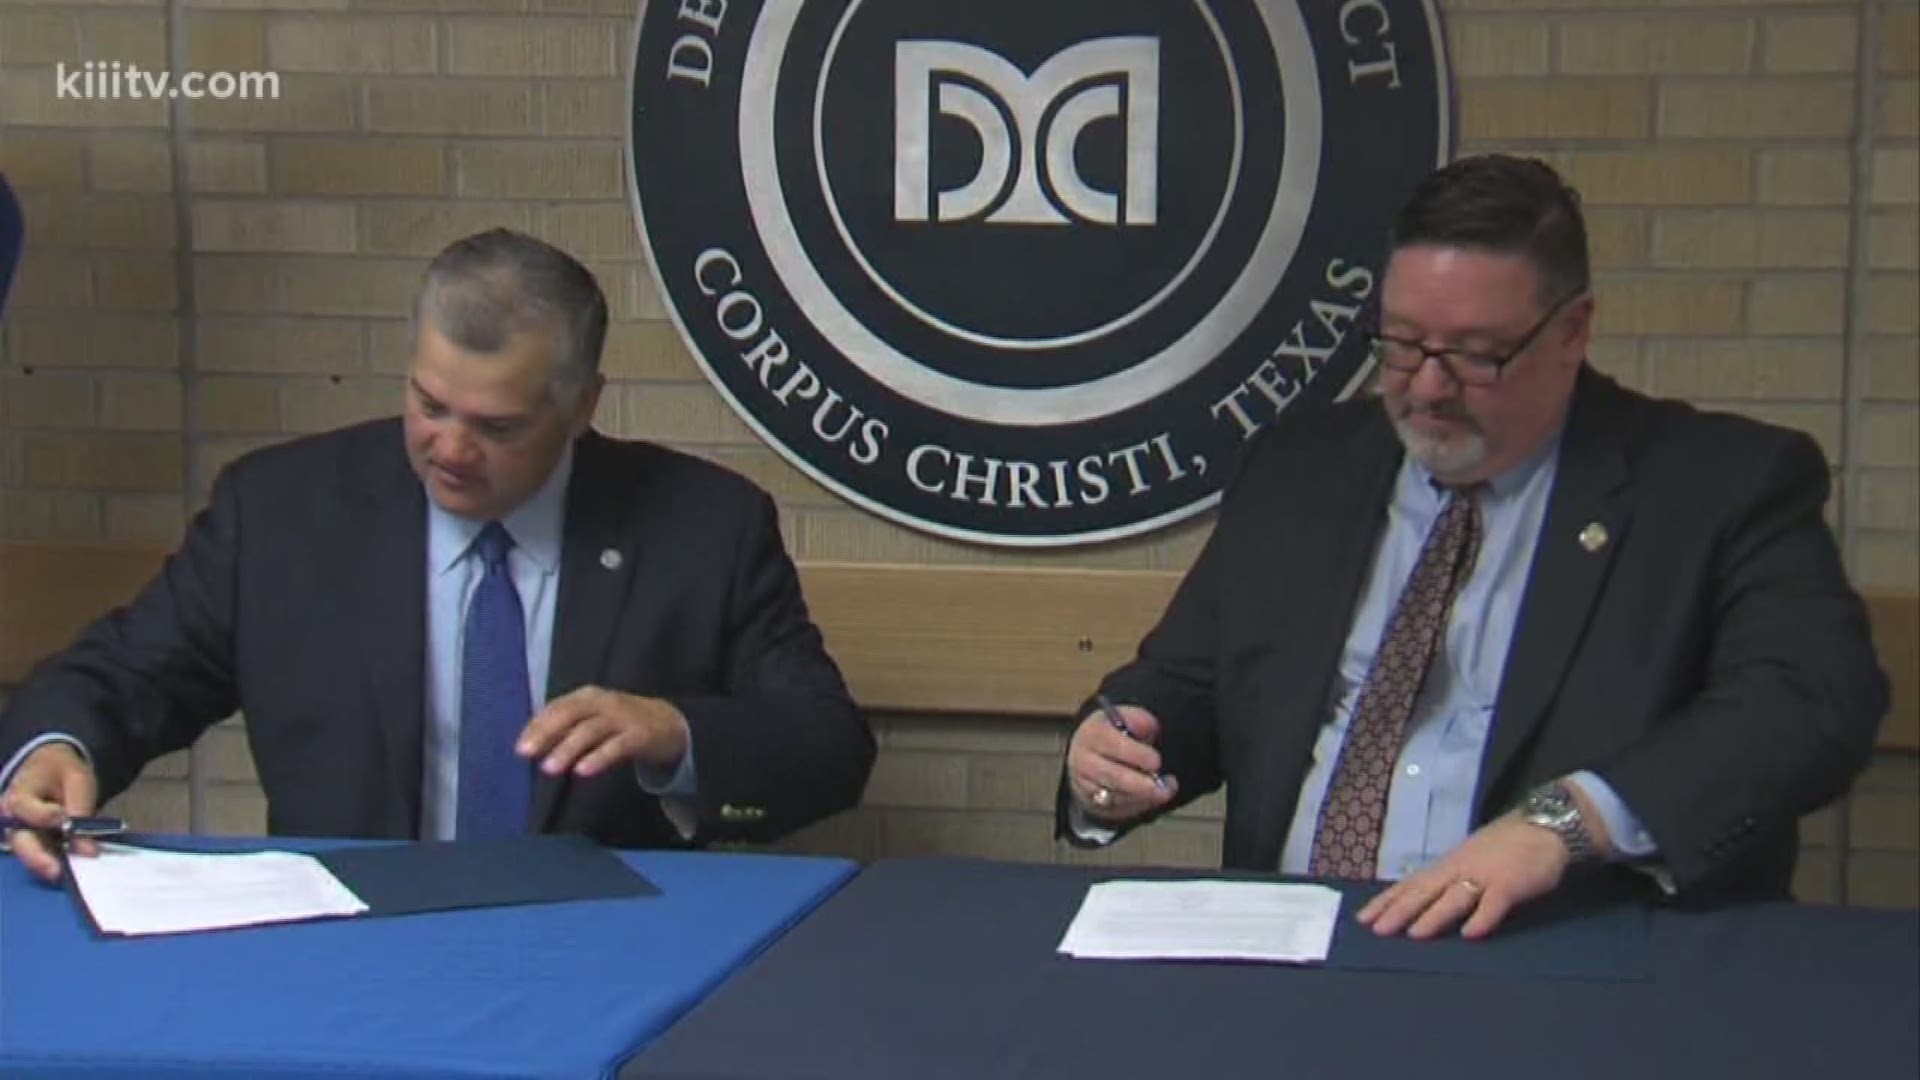 The agreement was signed with the chancellor of Western Governors University in Austin so students can continue their education online.